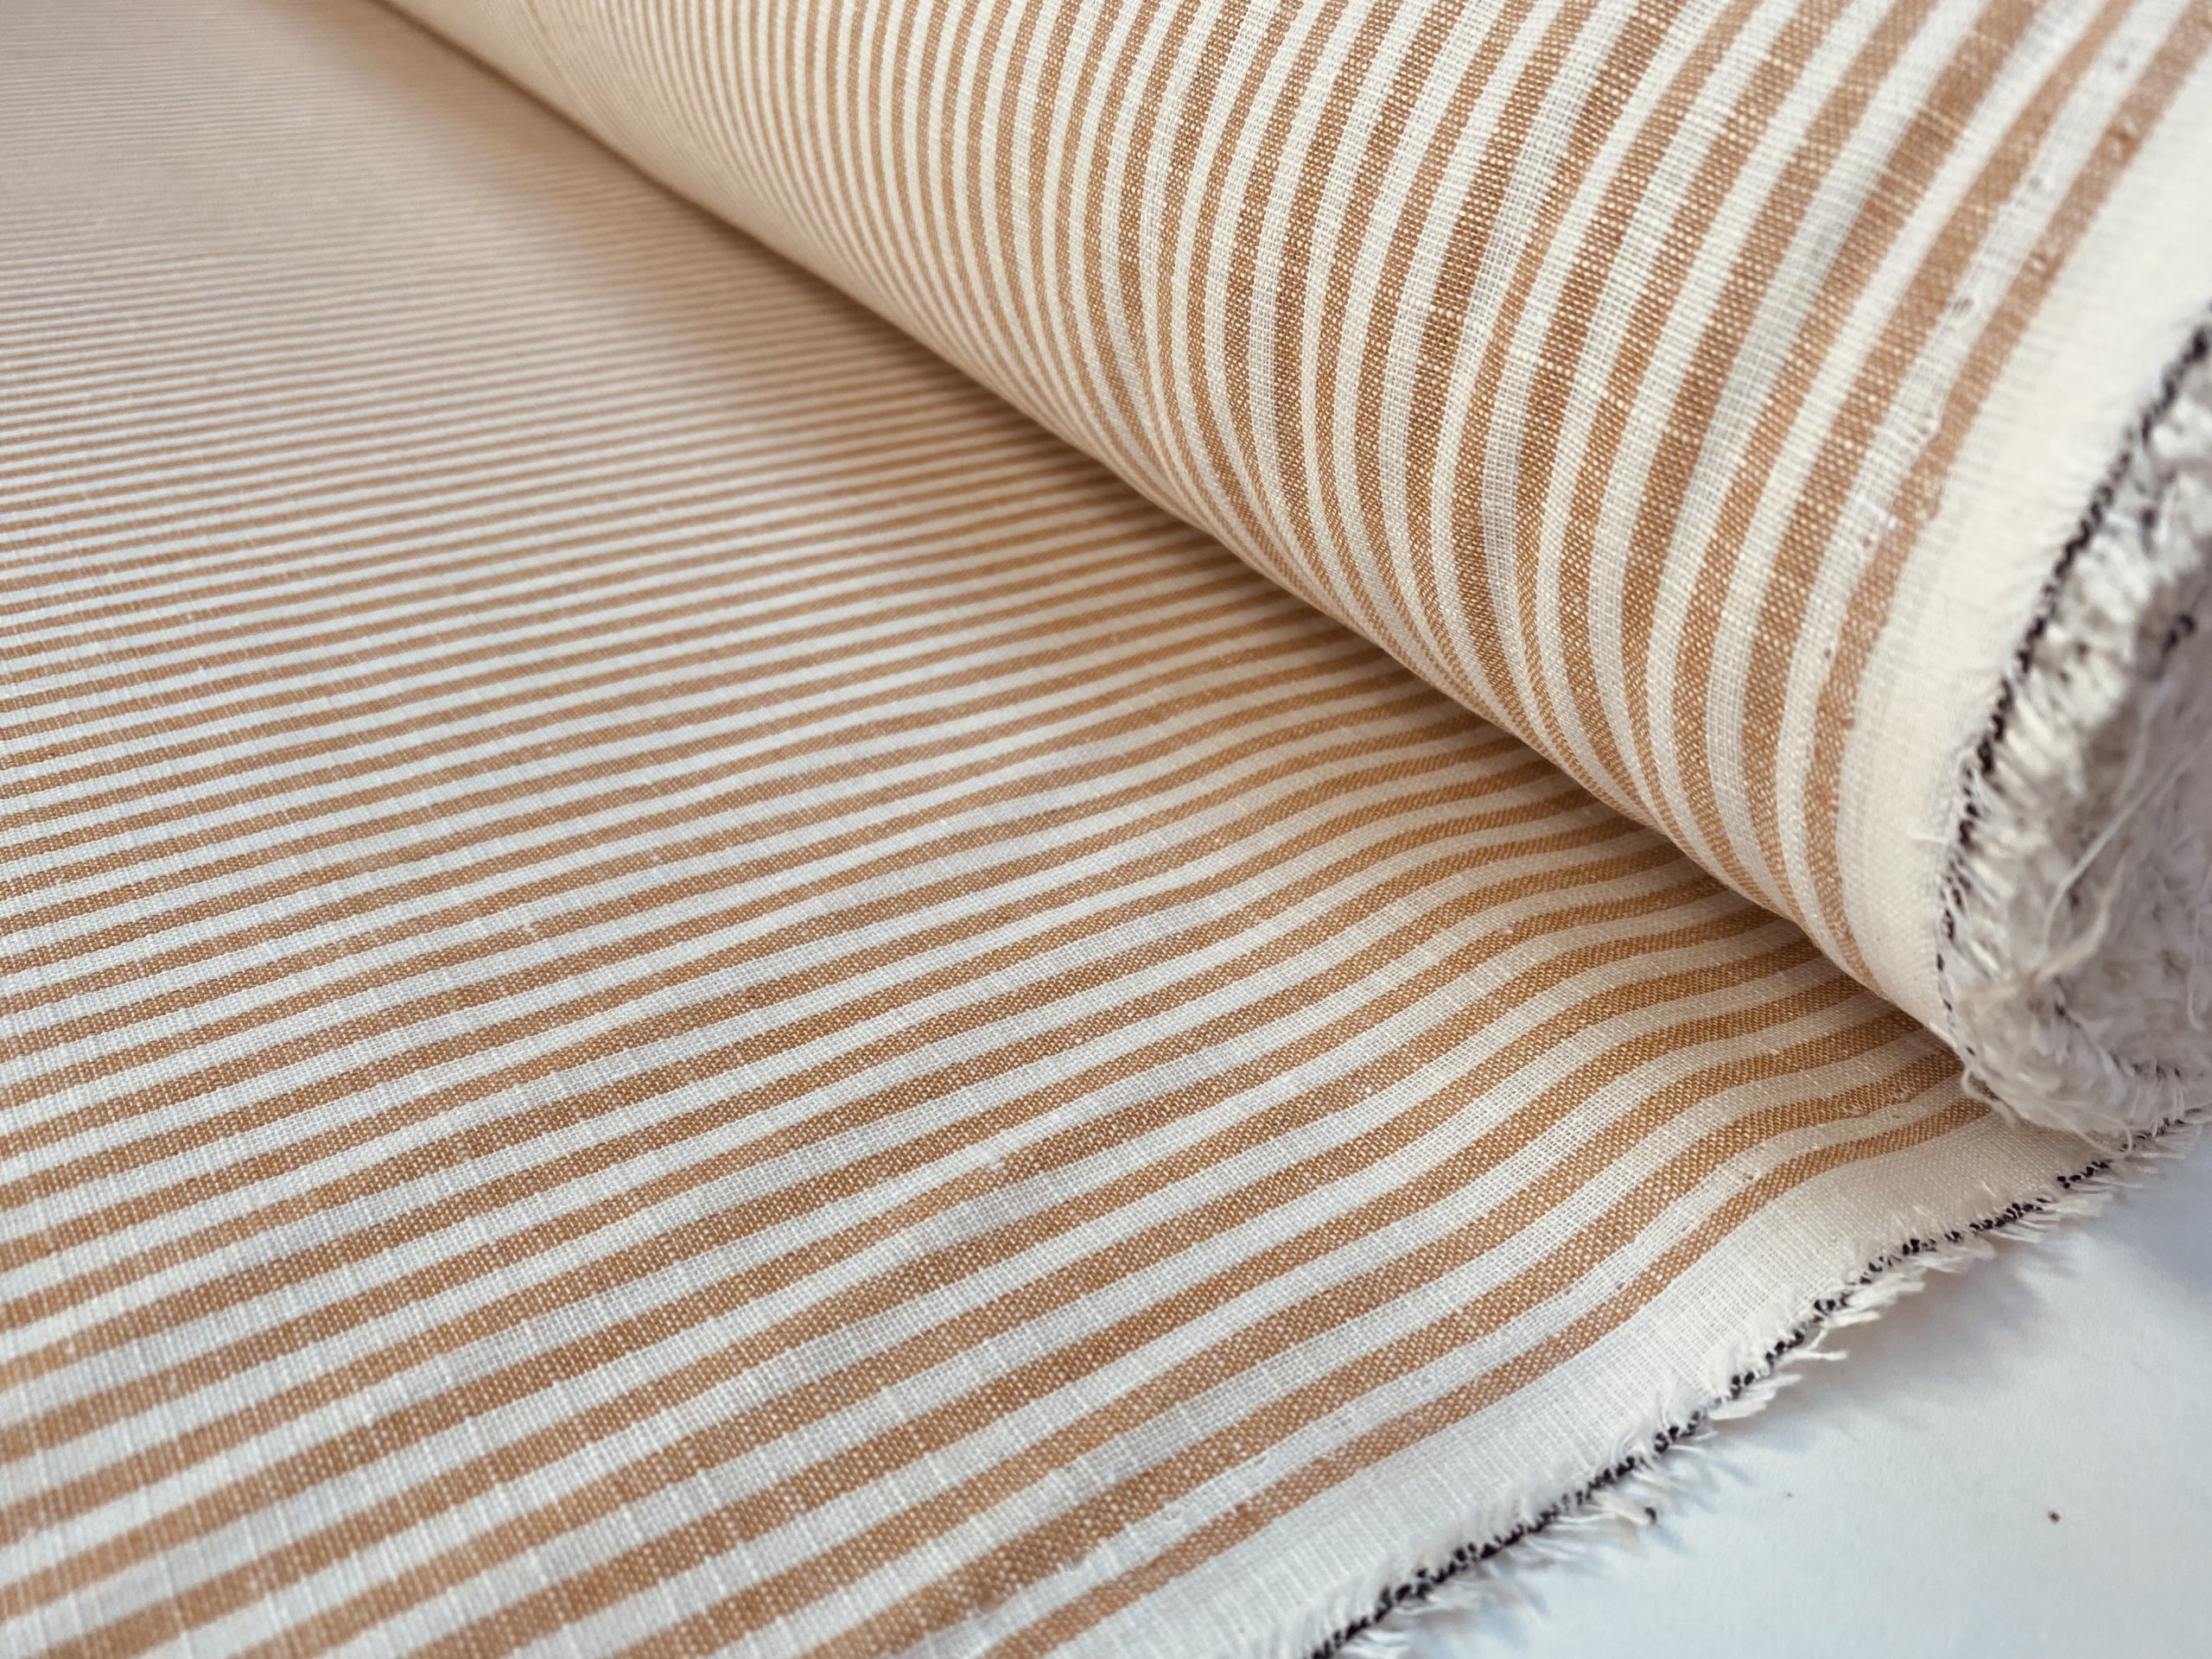 Candy Stripe Linen Fabric Light Cotton Material Cute Striped White Lines  Home Decor, Dressmaking - 59 or 150cm wide - Light Brown